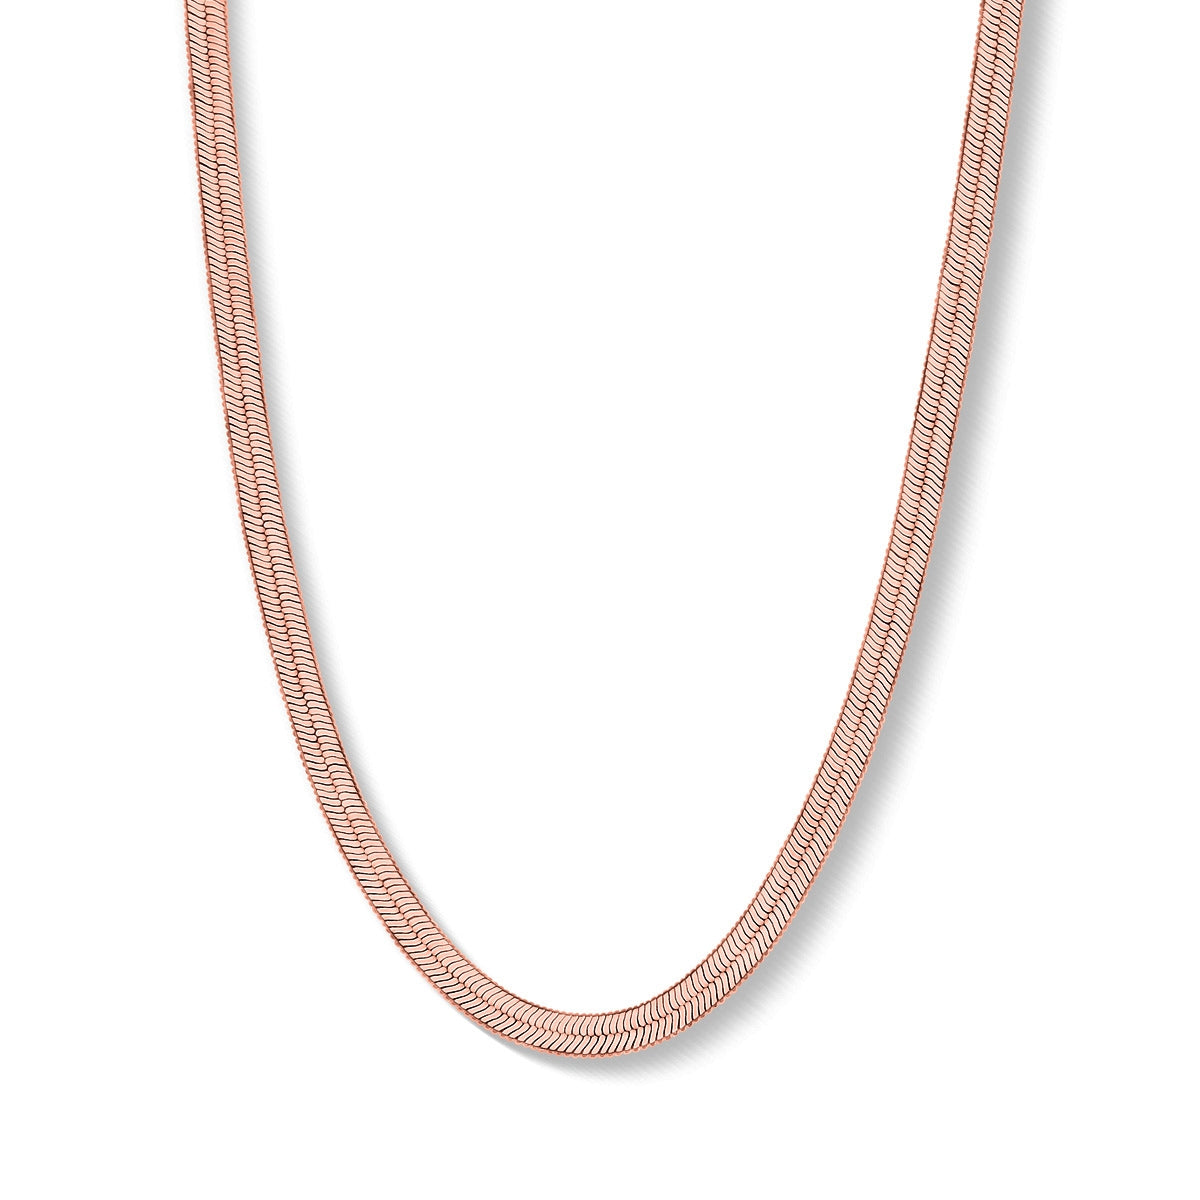 Solid rose gold flat chain necklace